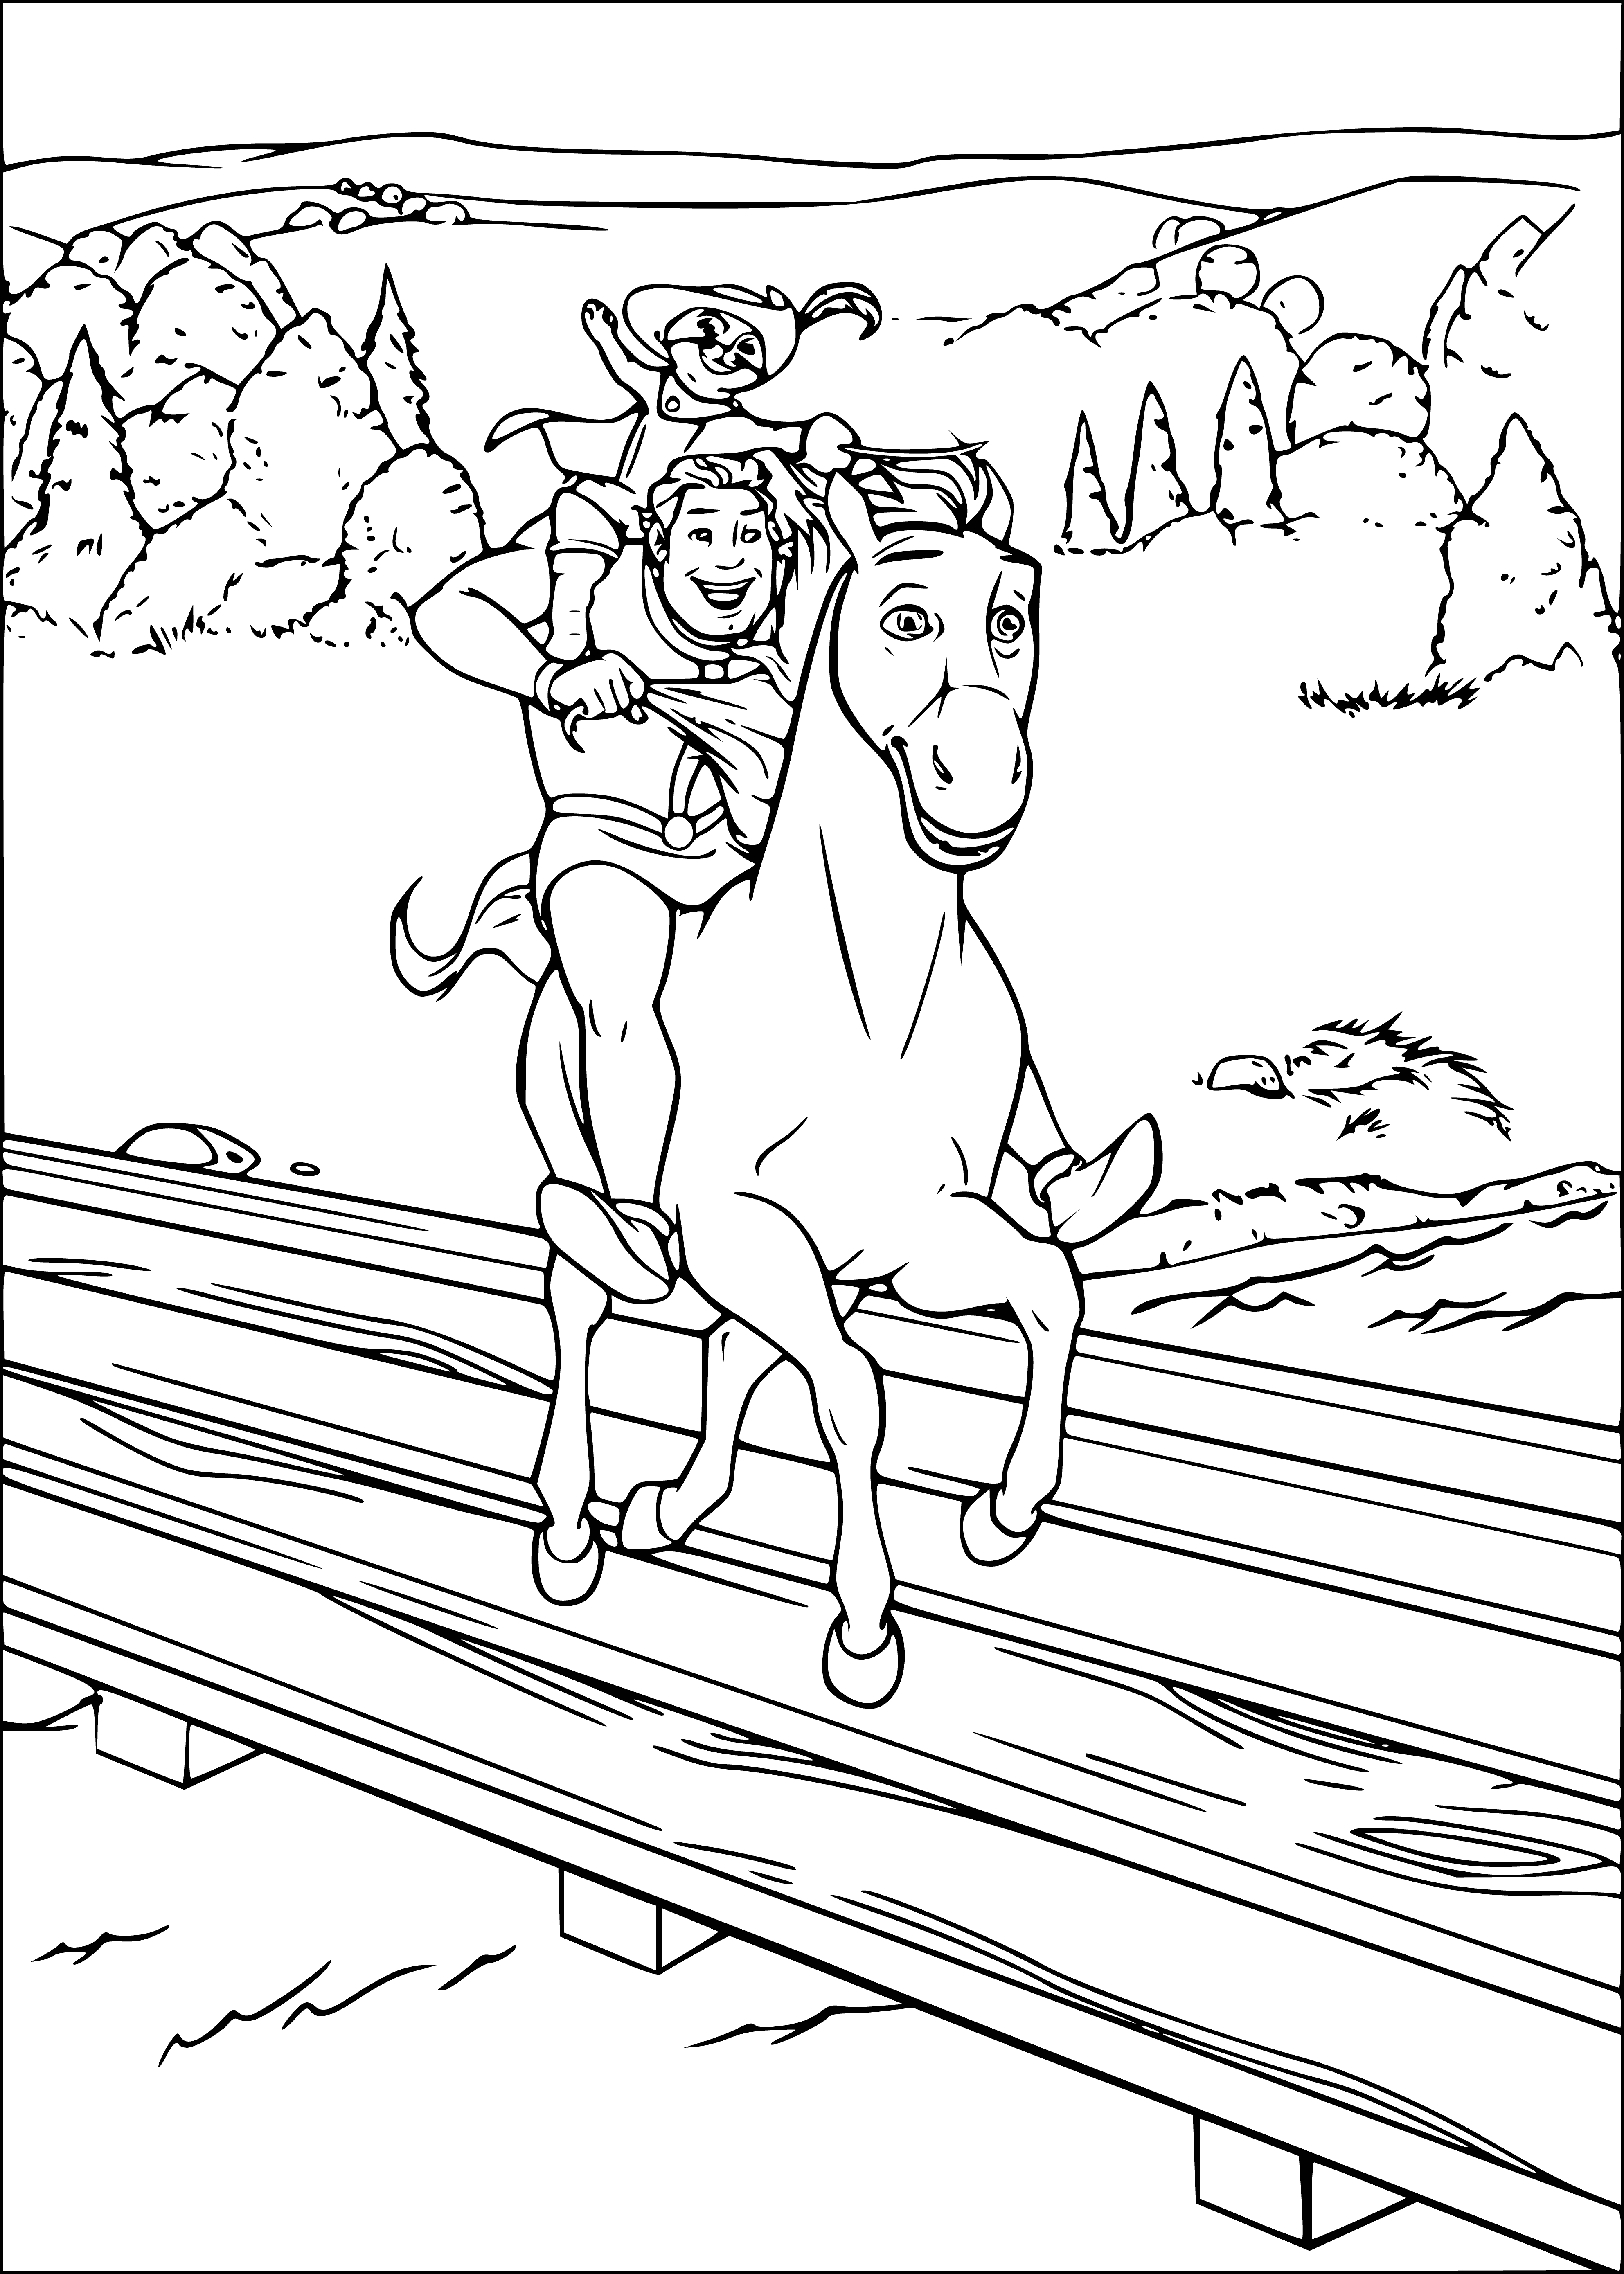 coloring page: Shrek and cat observe donkey with bridle/saddle but no rider.